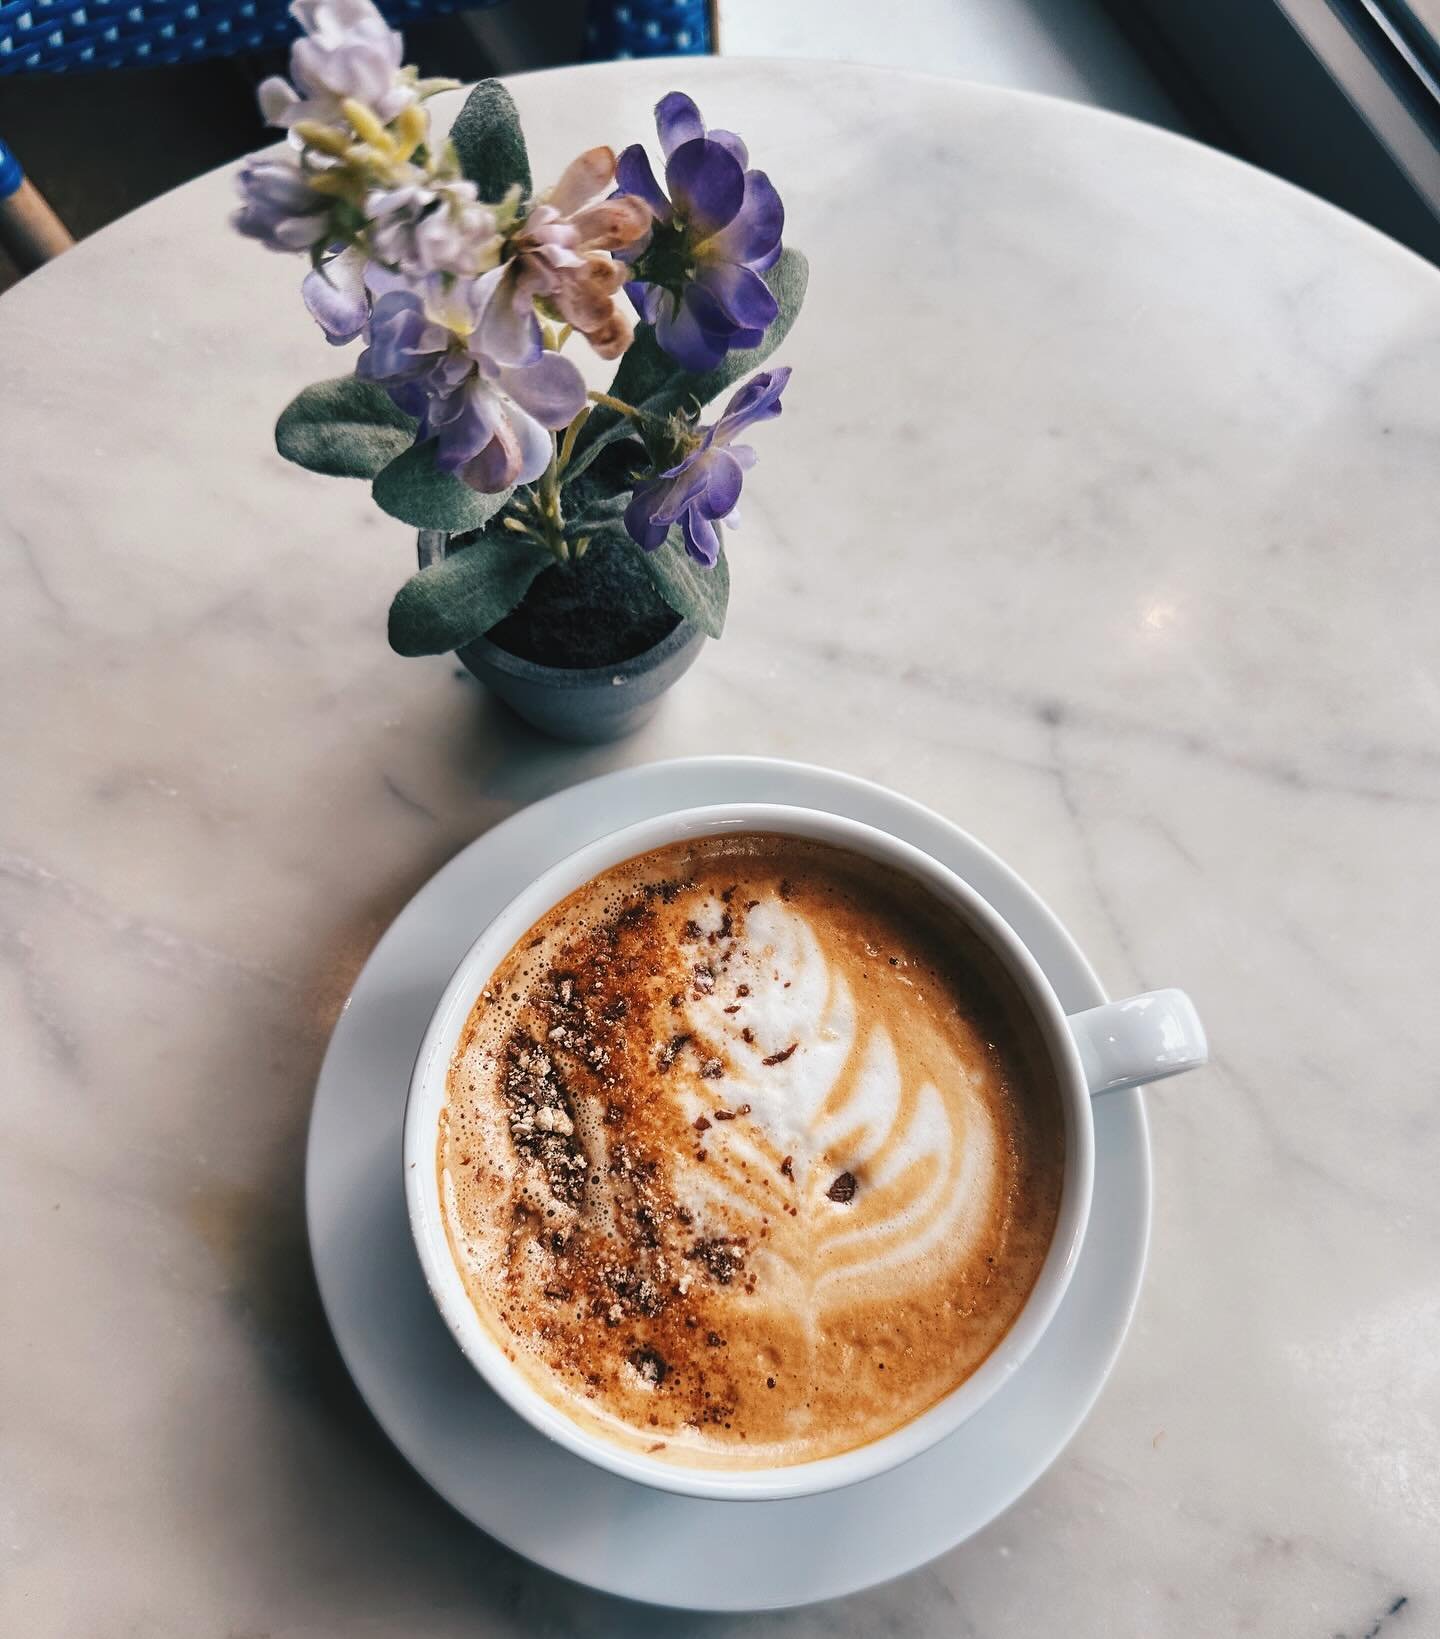 Only a few more days to try our delicious Twix latte and send more proceeds to NAMI Chicago 💐🥰 This donation creation has been the biggest hit! ☕️🍪

$1 of every latte is donated to their organization in support of Mental Health Awareness month &he